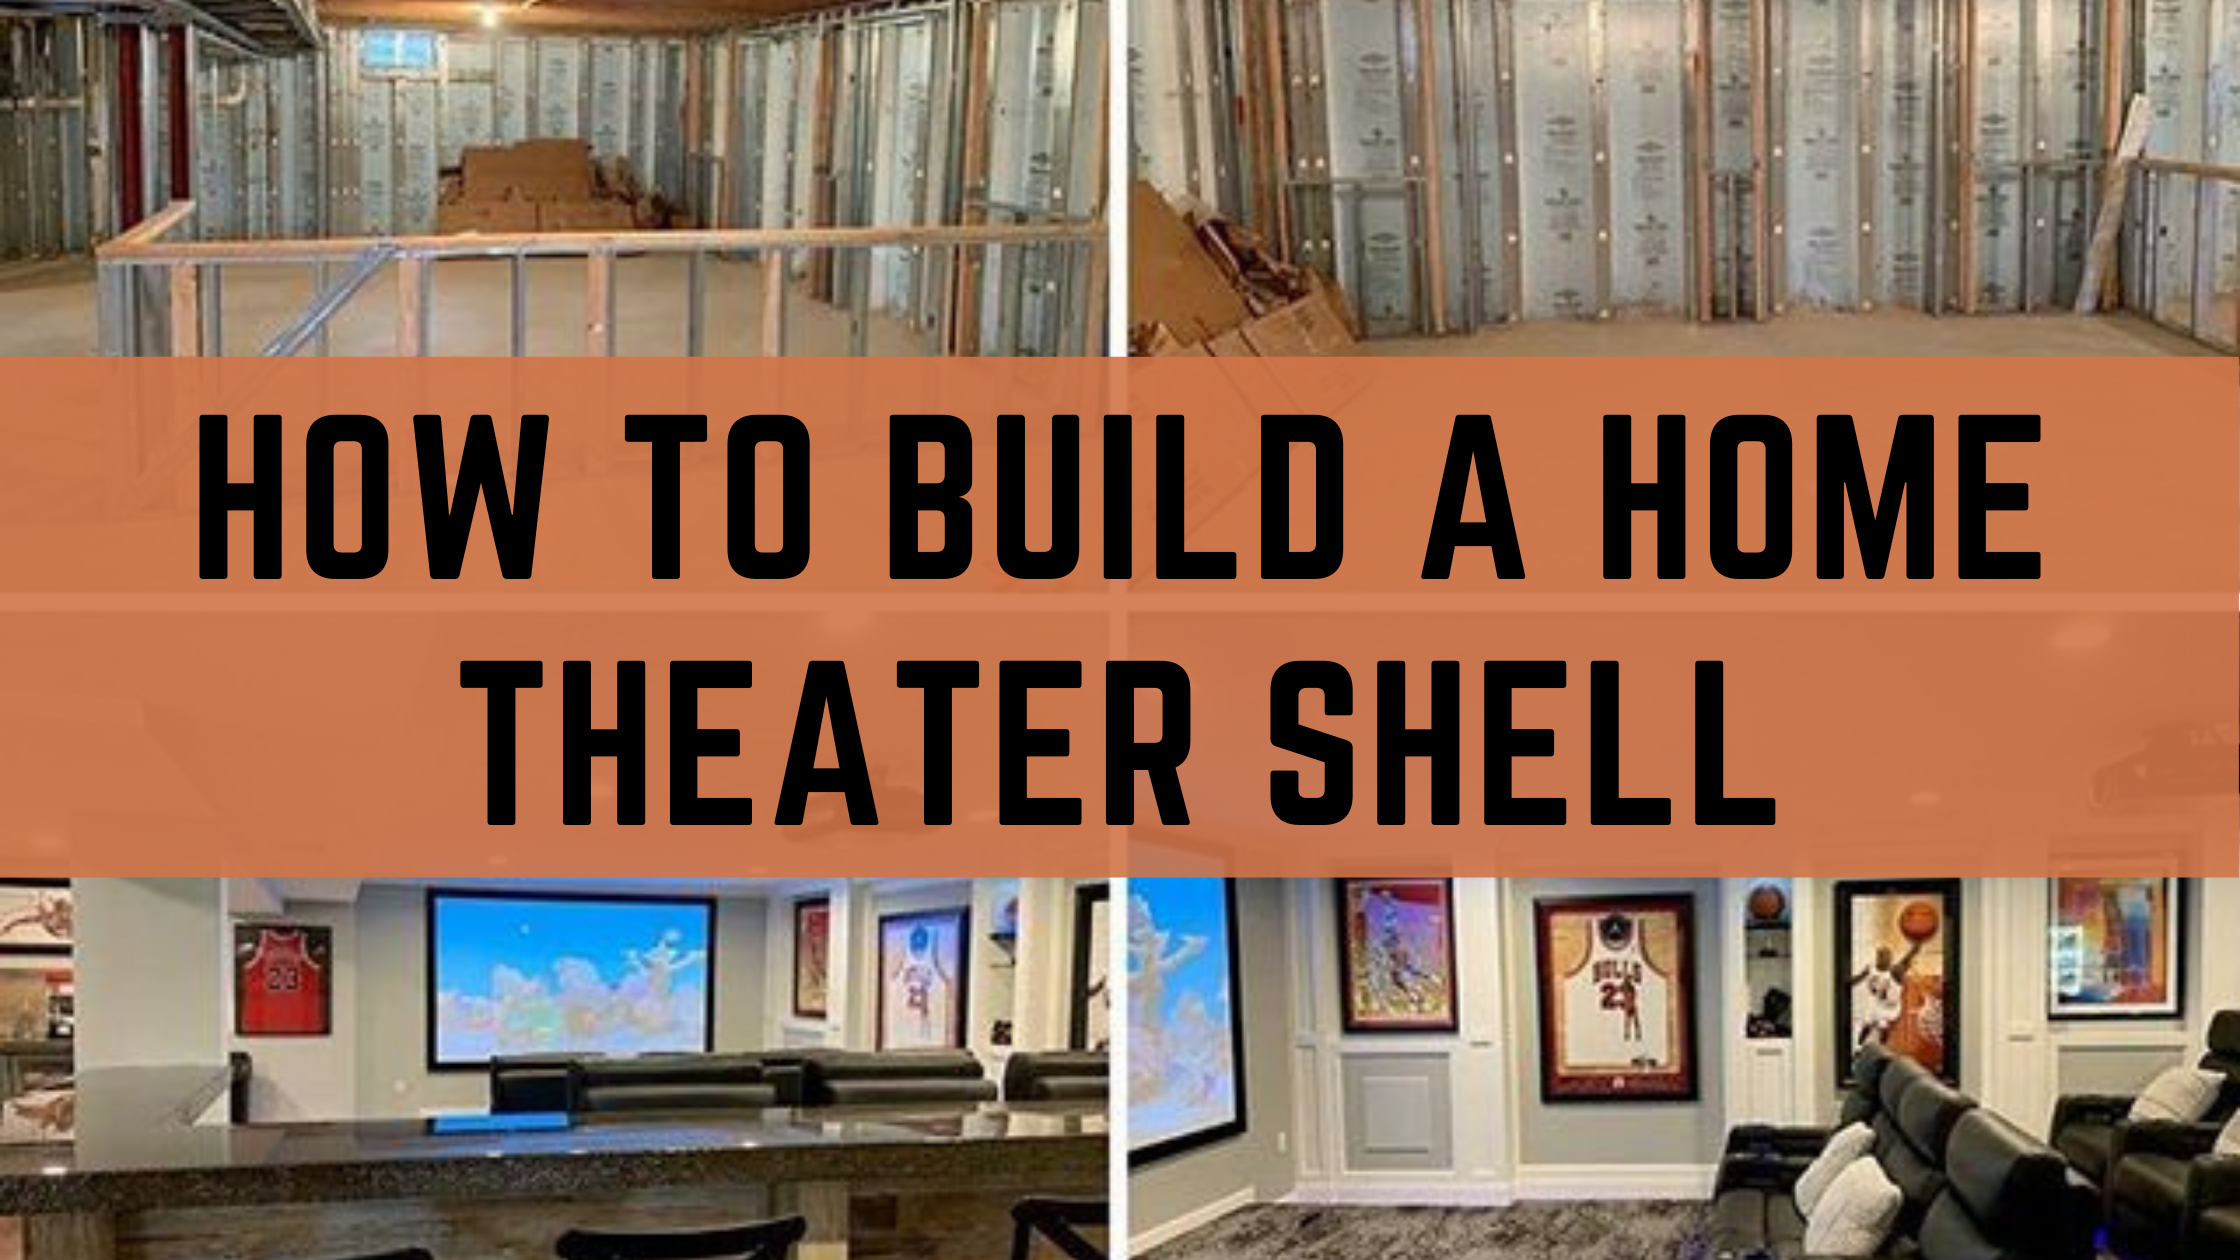 2. How To Build a Home Theater Shell